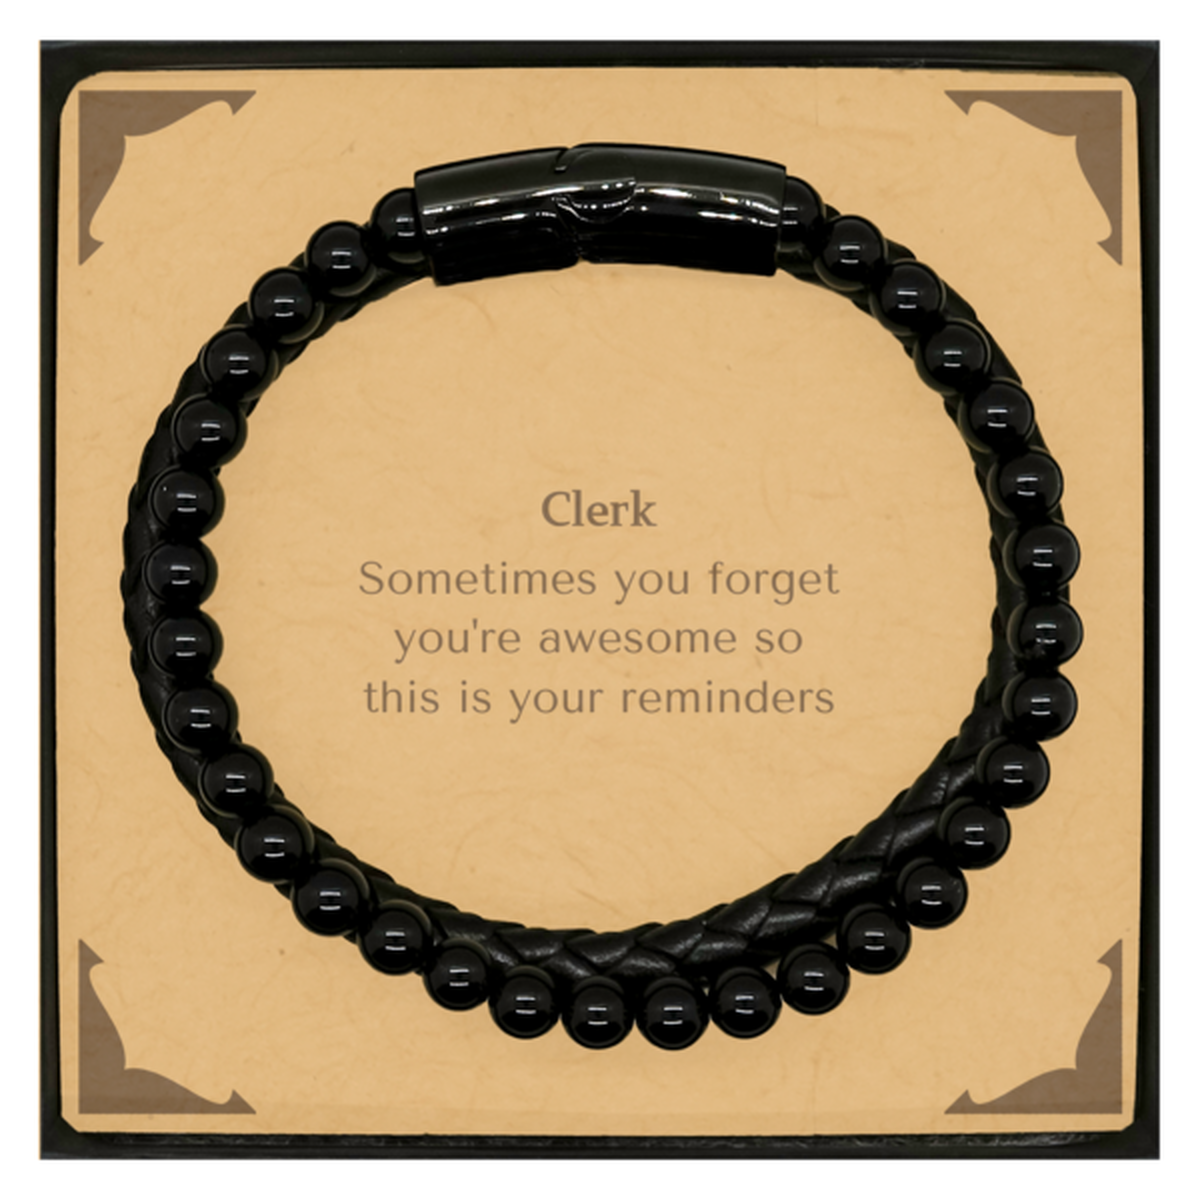 Sentimental Clerk Stone Leather Bracelets, Clerk Sometimes you forget you're awesome so this is your reminders, Graduation Christmas Birthday Gifts for Clerk, Men, Women, Coworkers